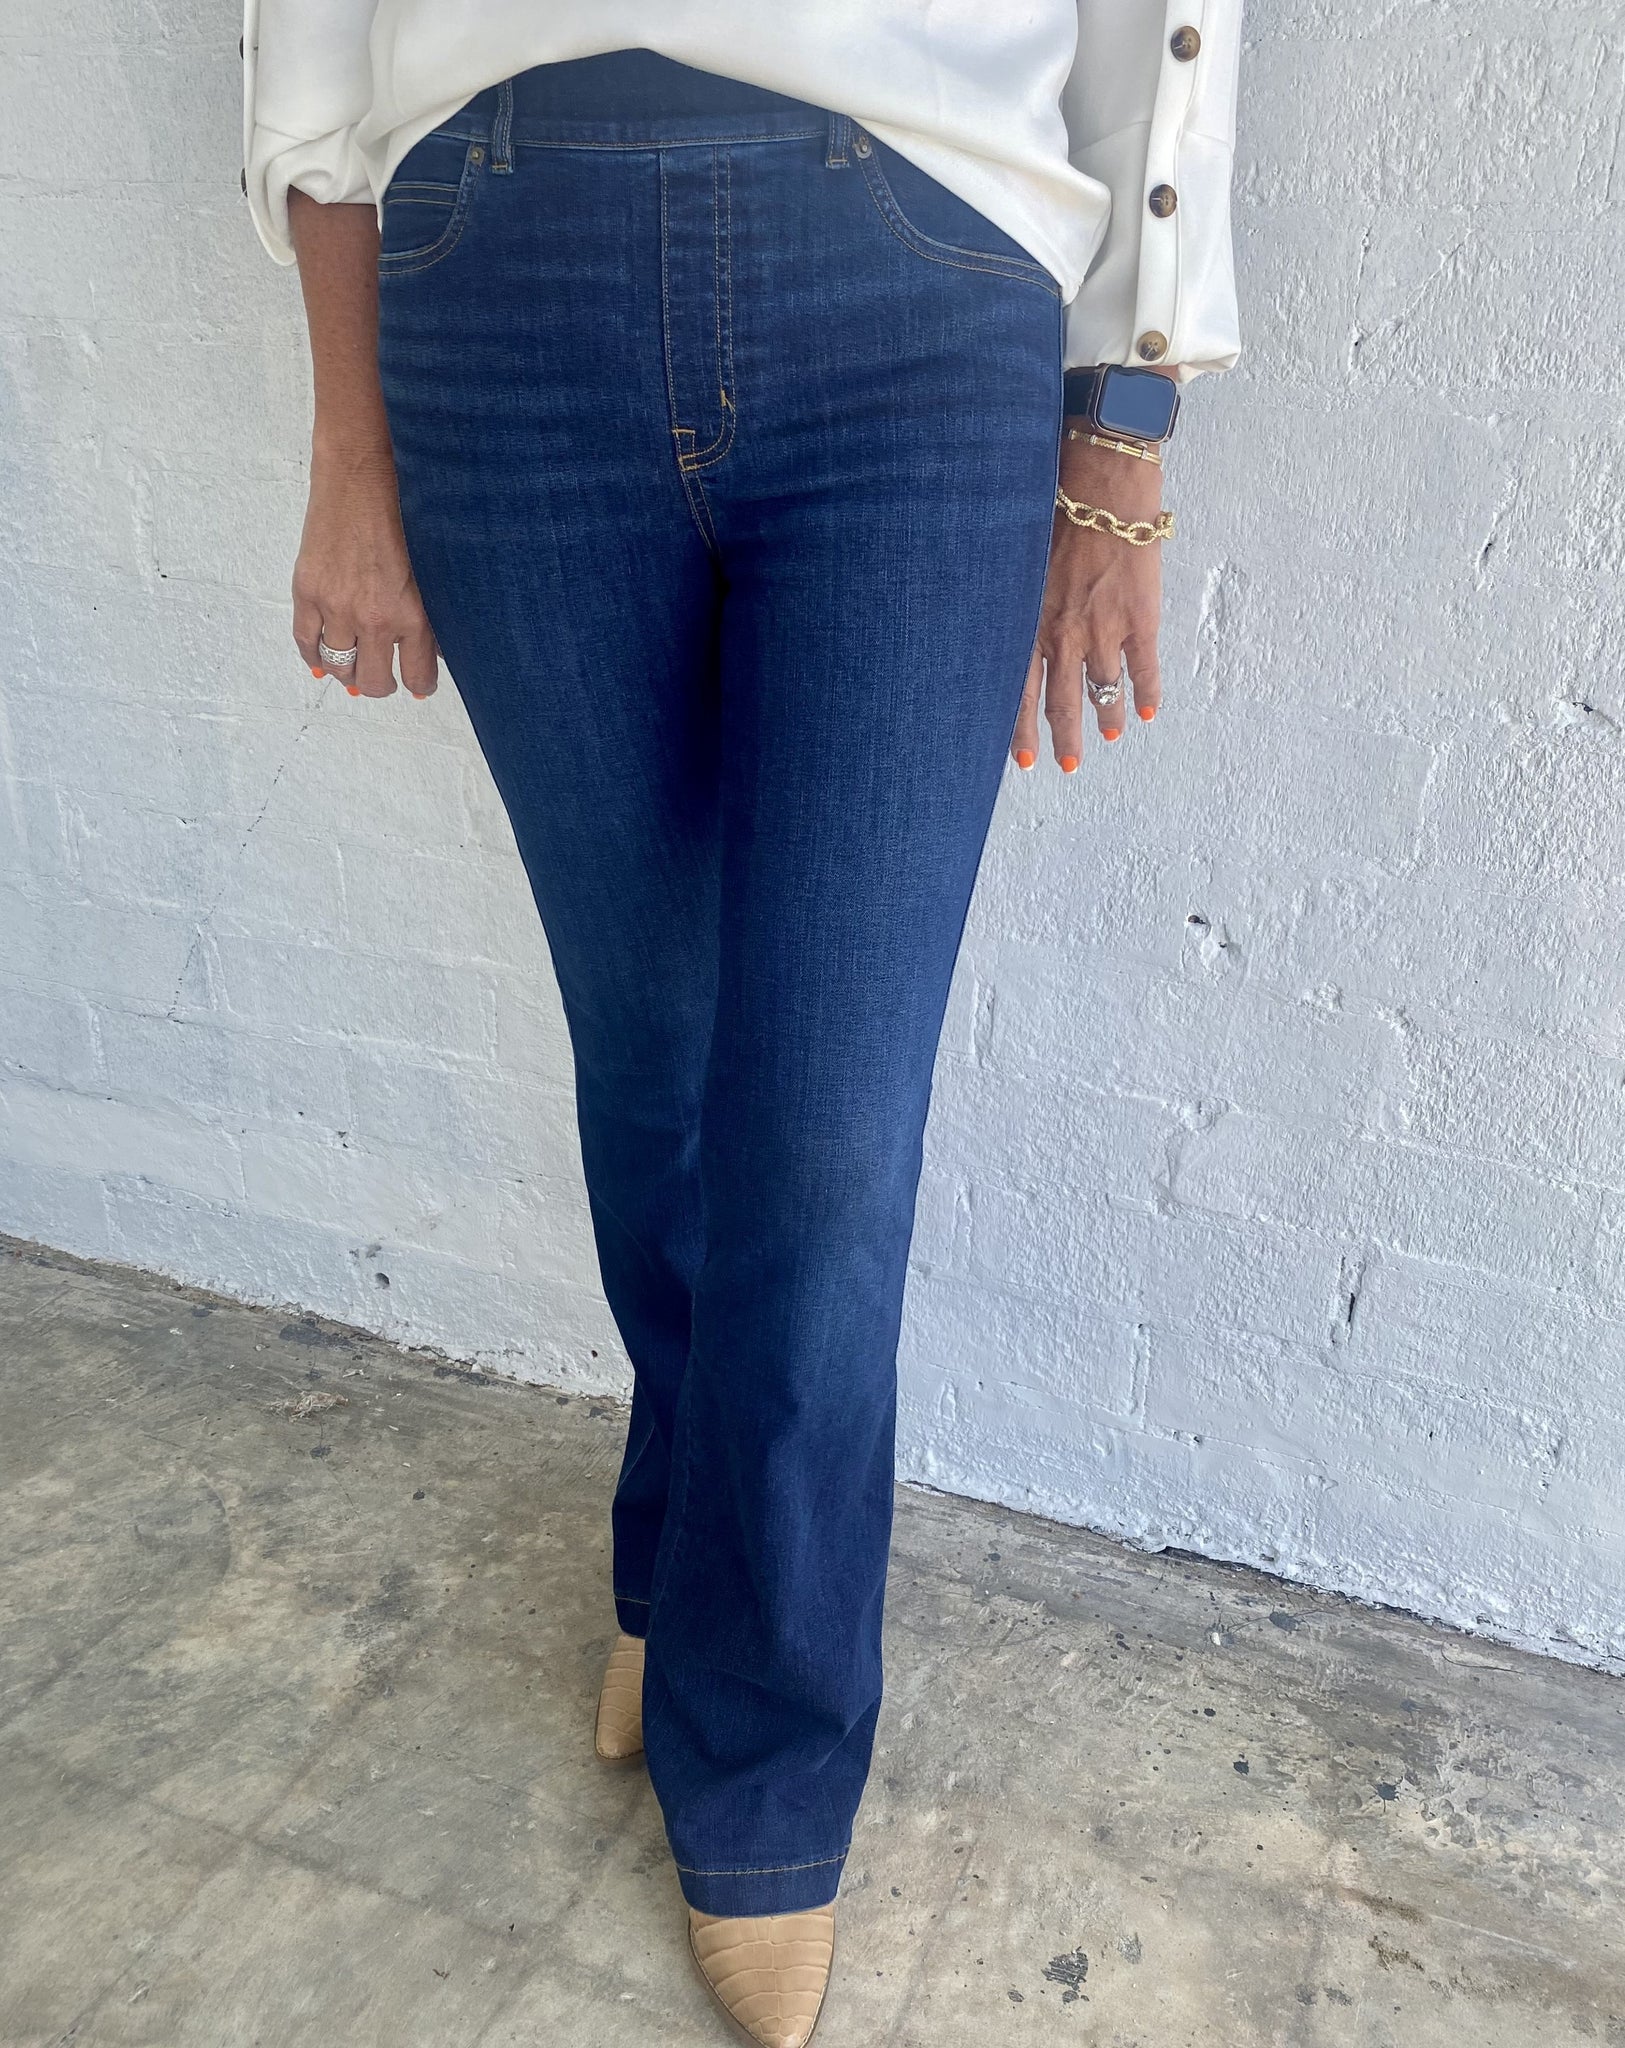 Spanx Flare Jeans Vintage Indigo – The Blue Collection